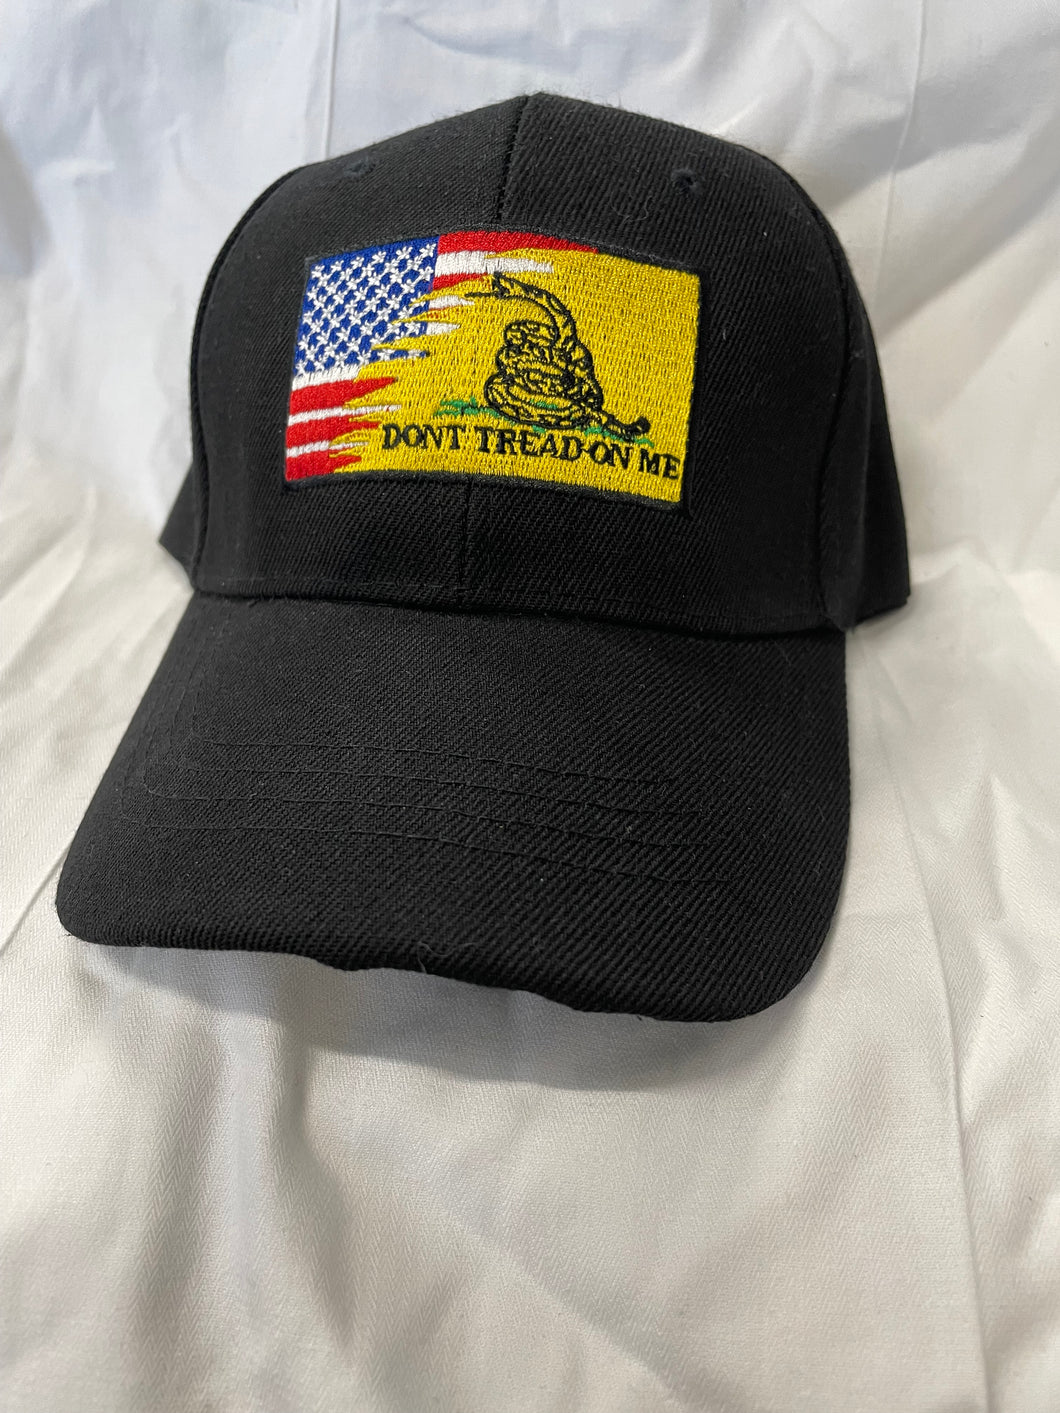 New Baseball Style Cap with Velcro Rear Size Adjustment/American and Gadsen Flag